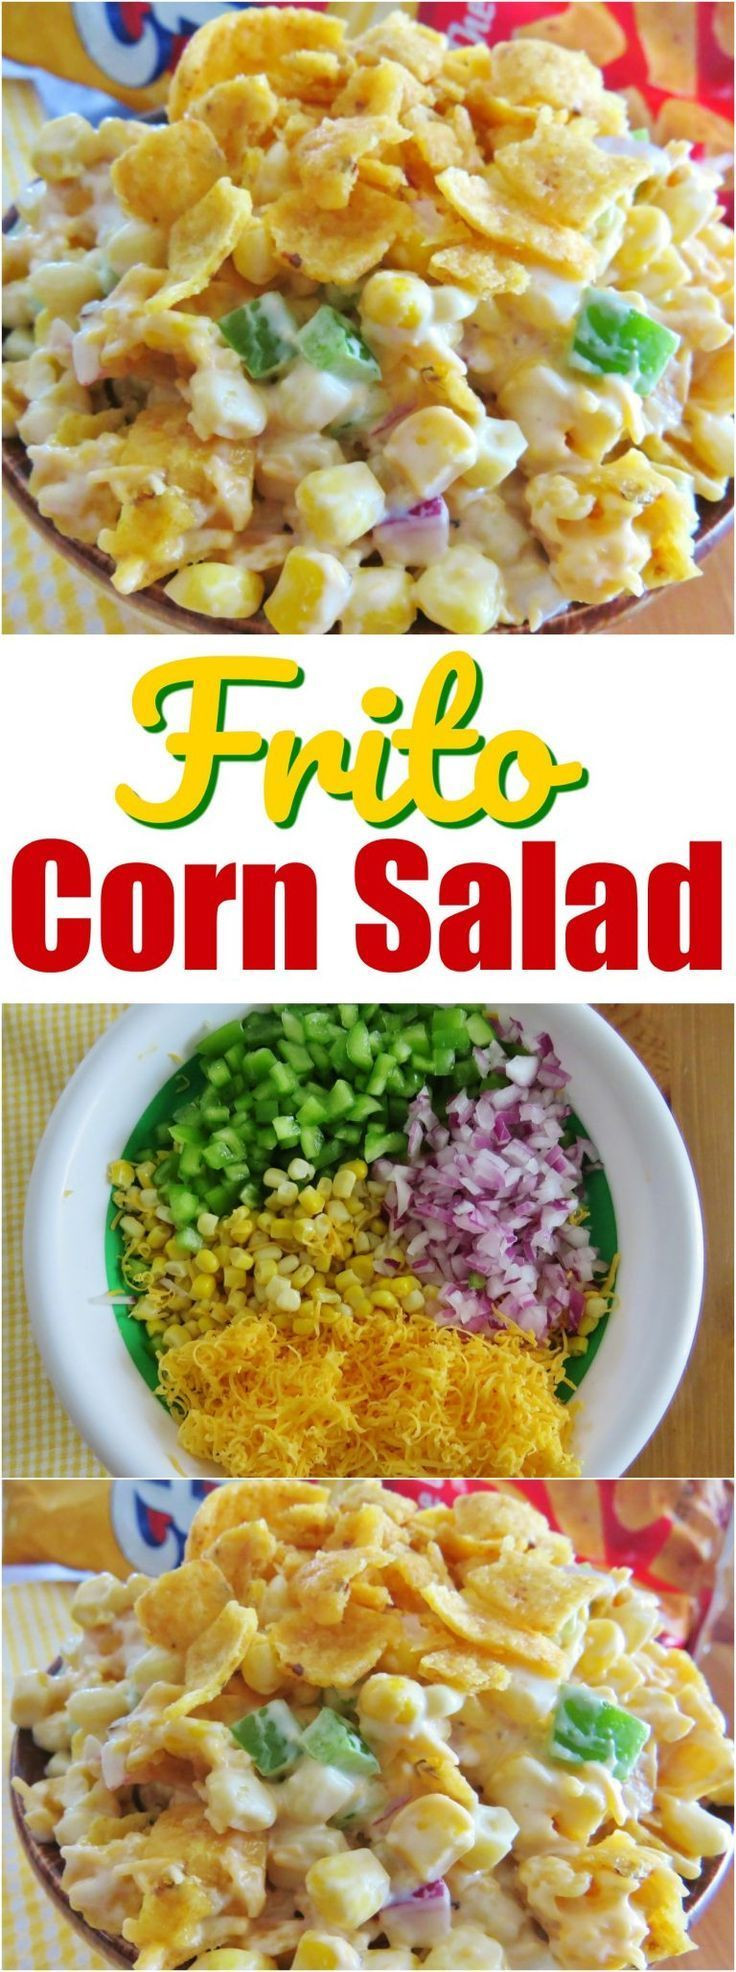 Side Dishes For Camping
 Best 25 Camping salads ideas on Pinterest